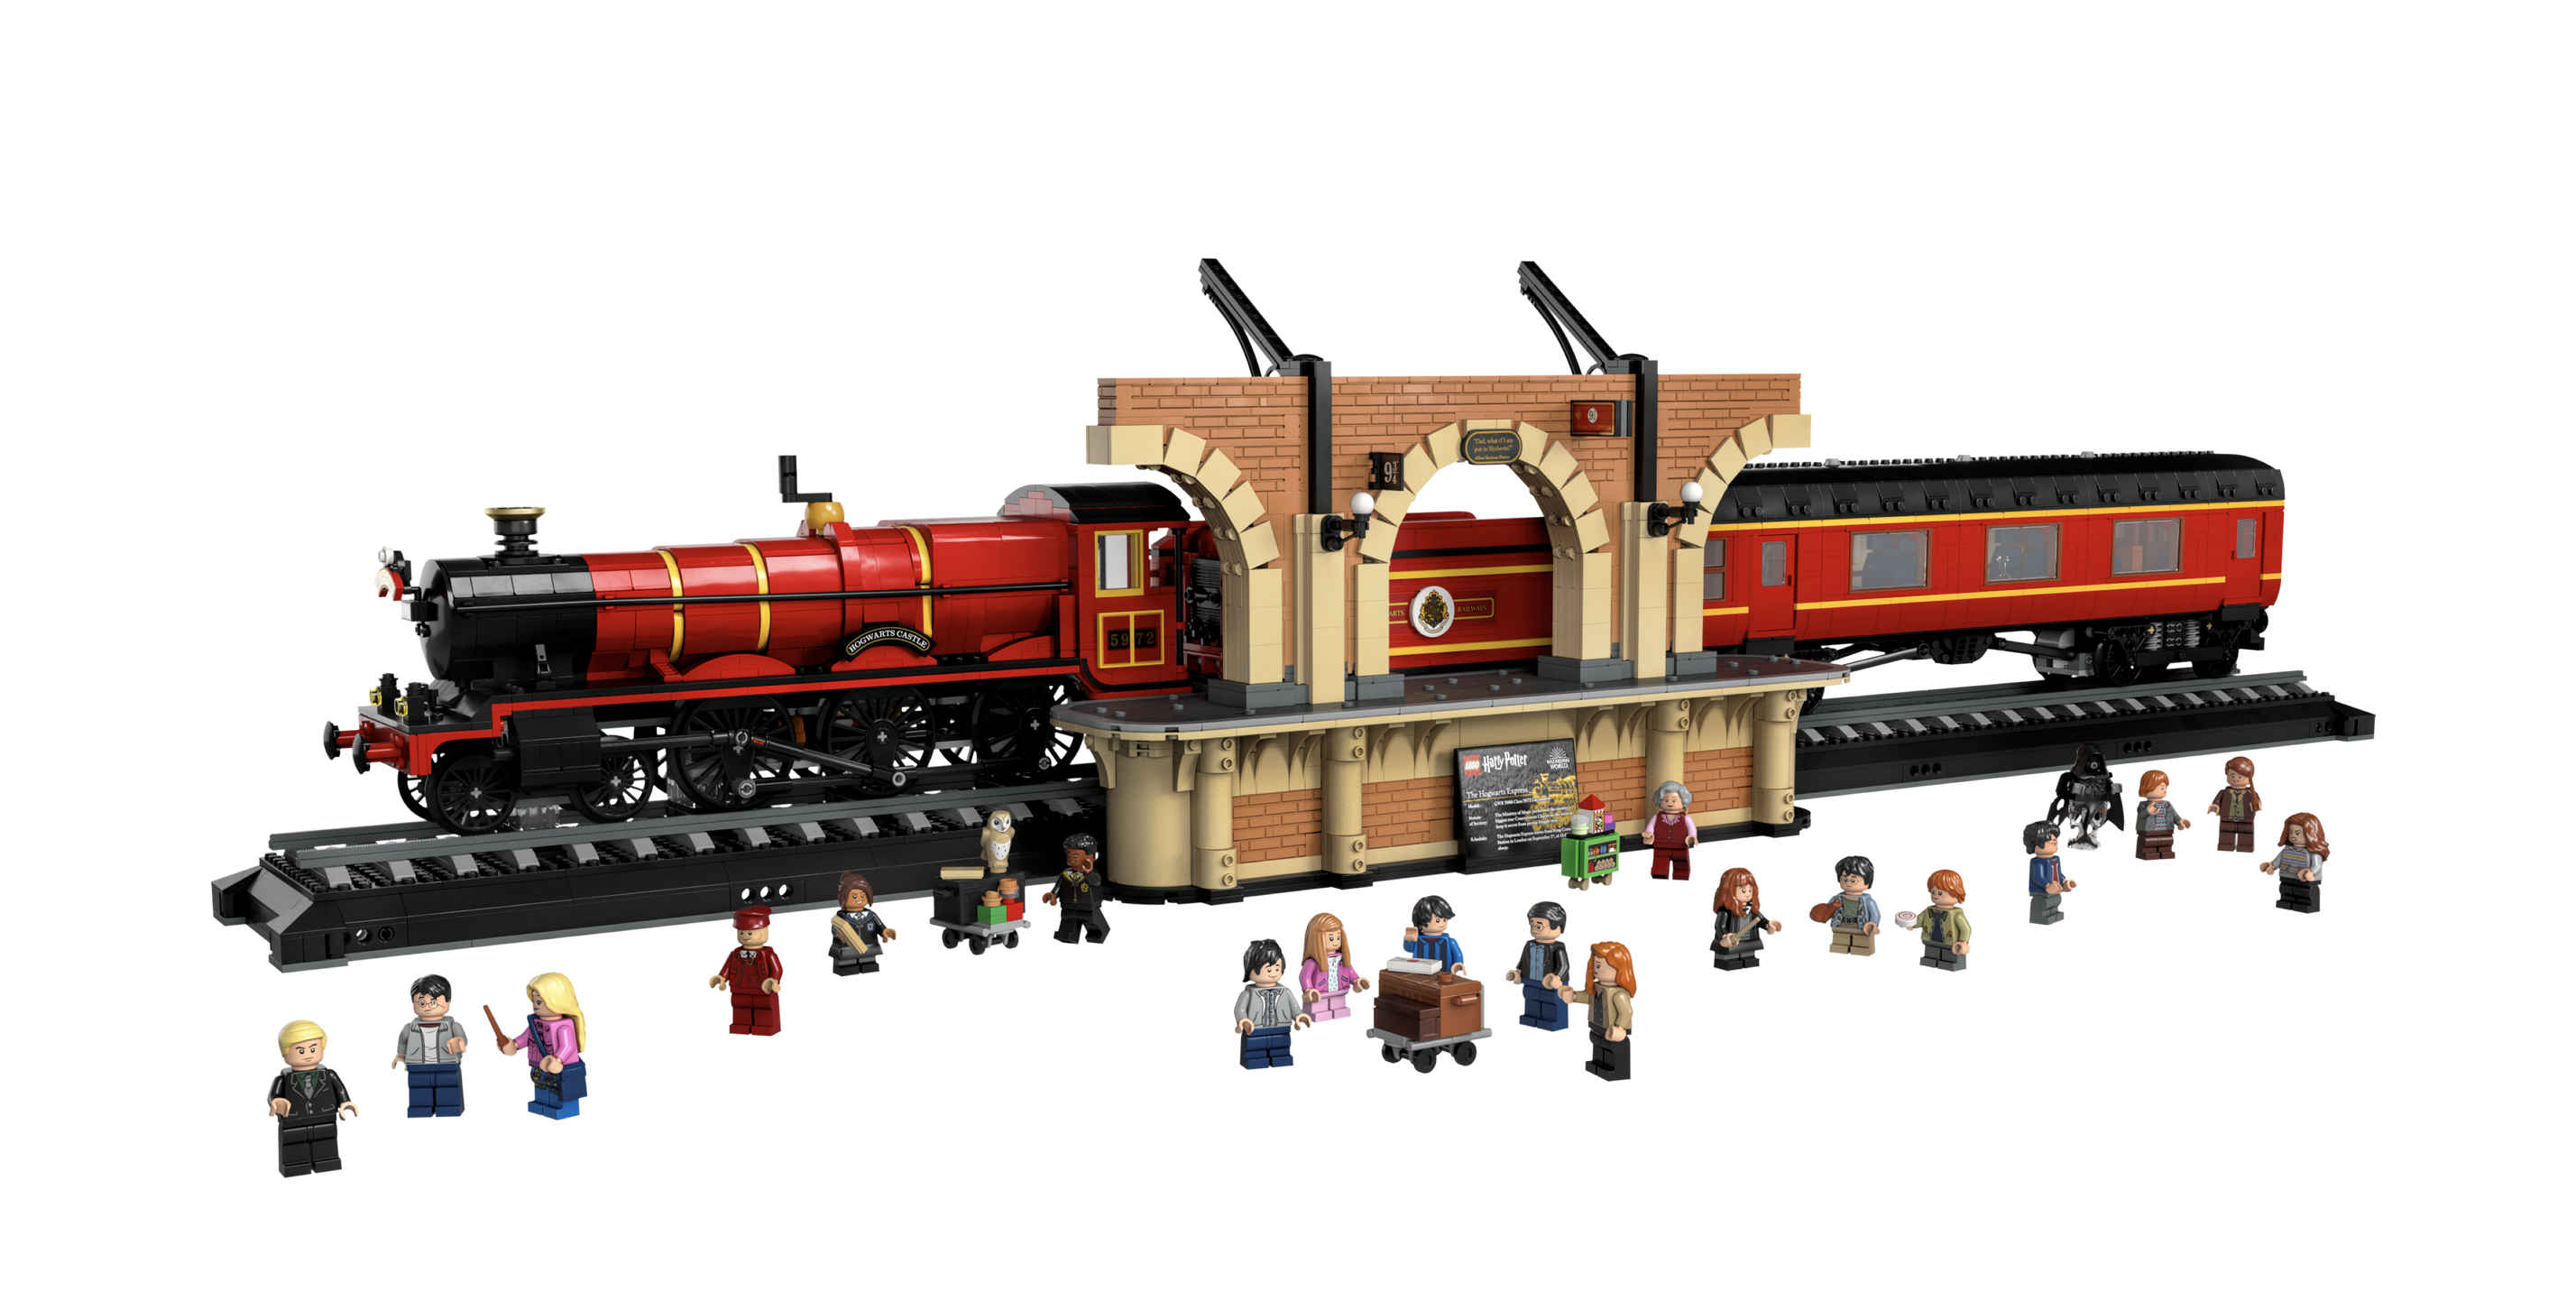 A top-of-the-line product from Lego’s Harry Potter-themed line is the Collector’s Edition Hogwarts Express kit, priced at $499.99. Image courtesy of Lego